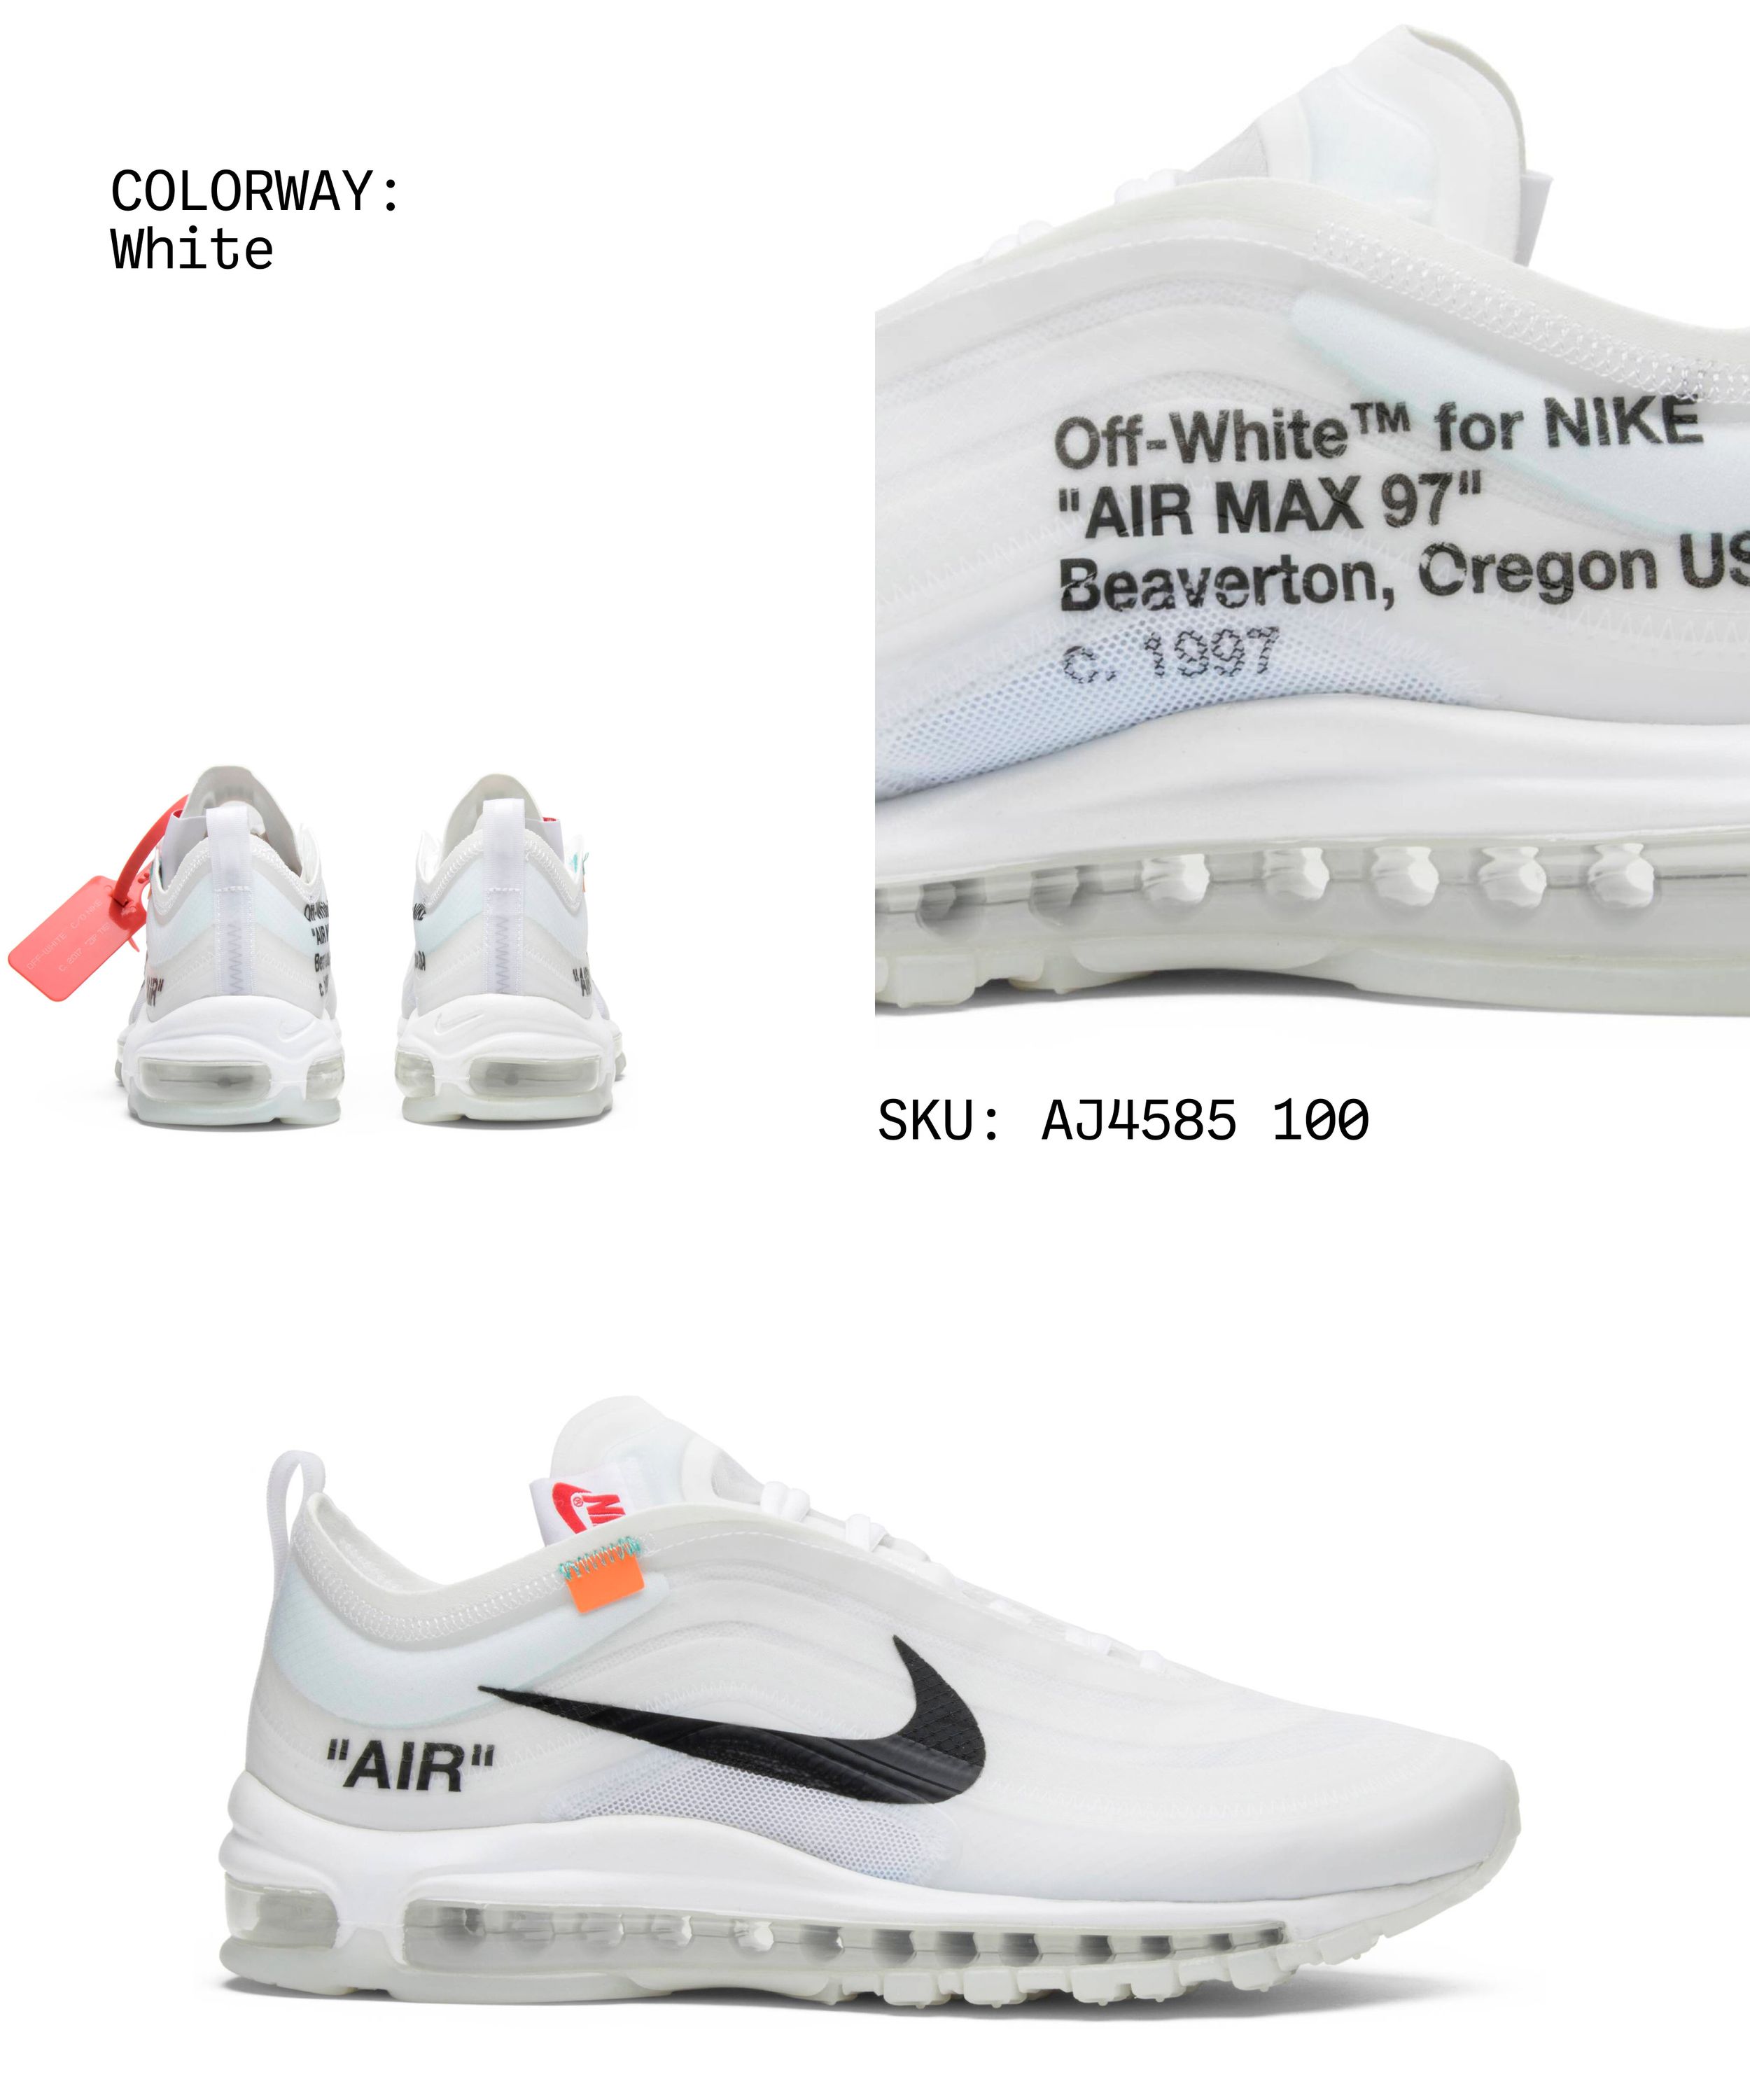 Virgil's Off-White/Nike collaboration created some of the biggest hype in  sneaker culture history. Which pair is your favorite?🕊️💥